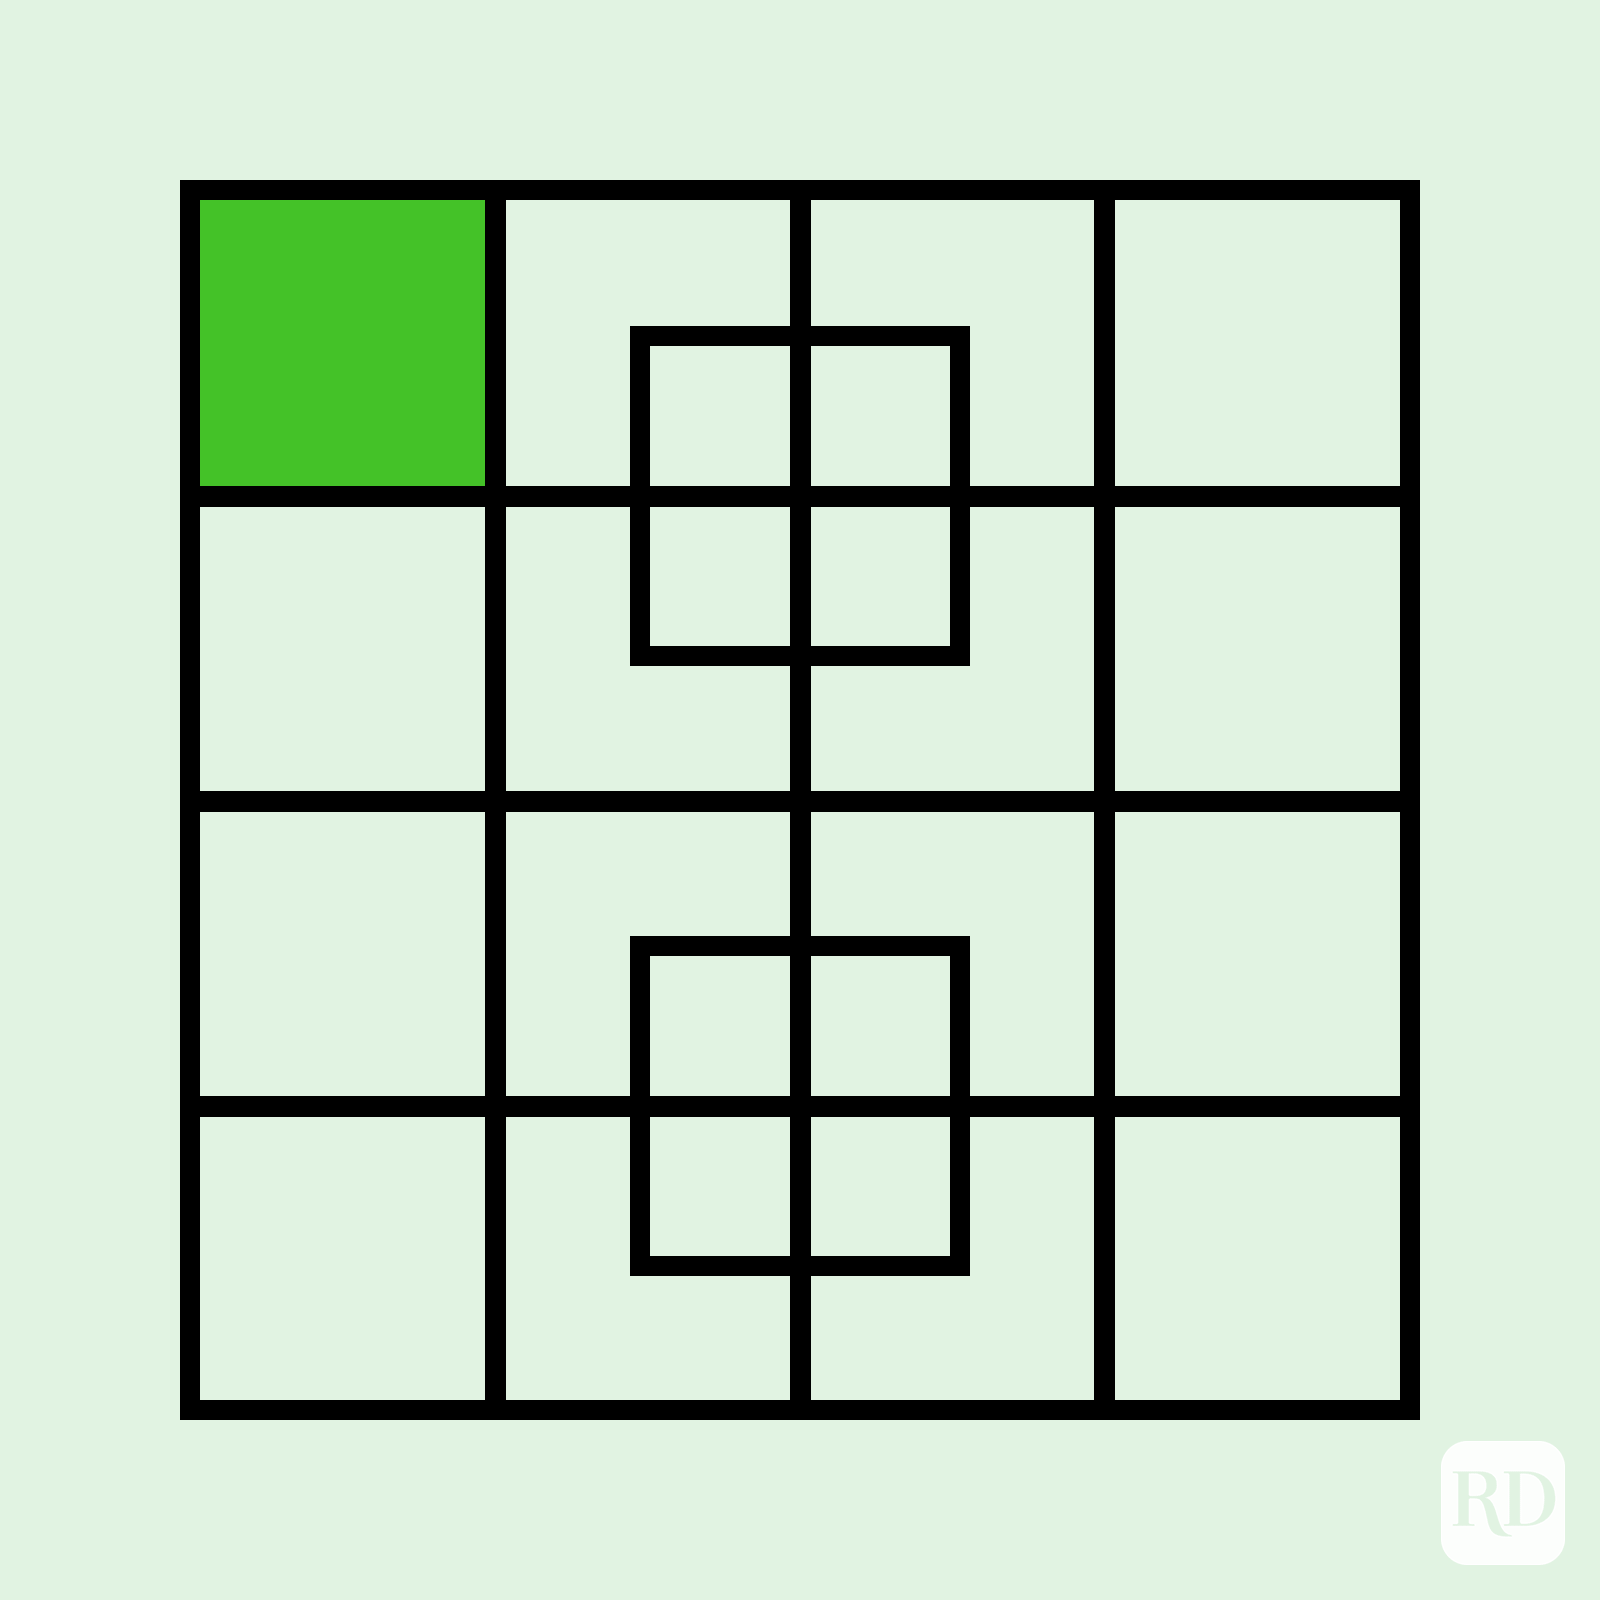 Green squares flashing inside a puzzle